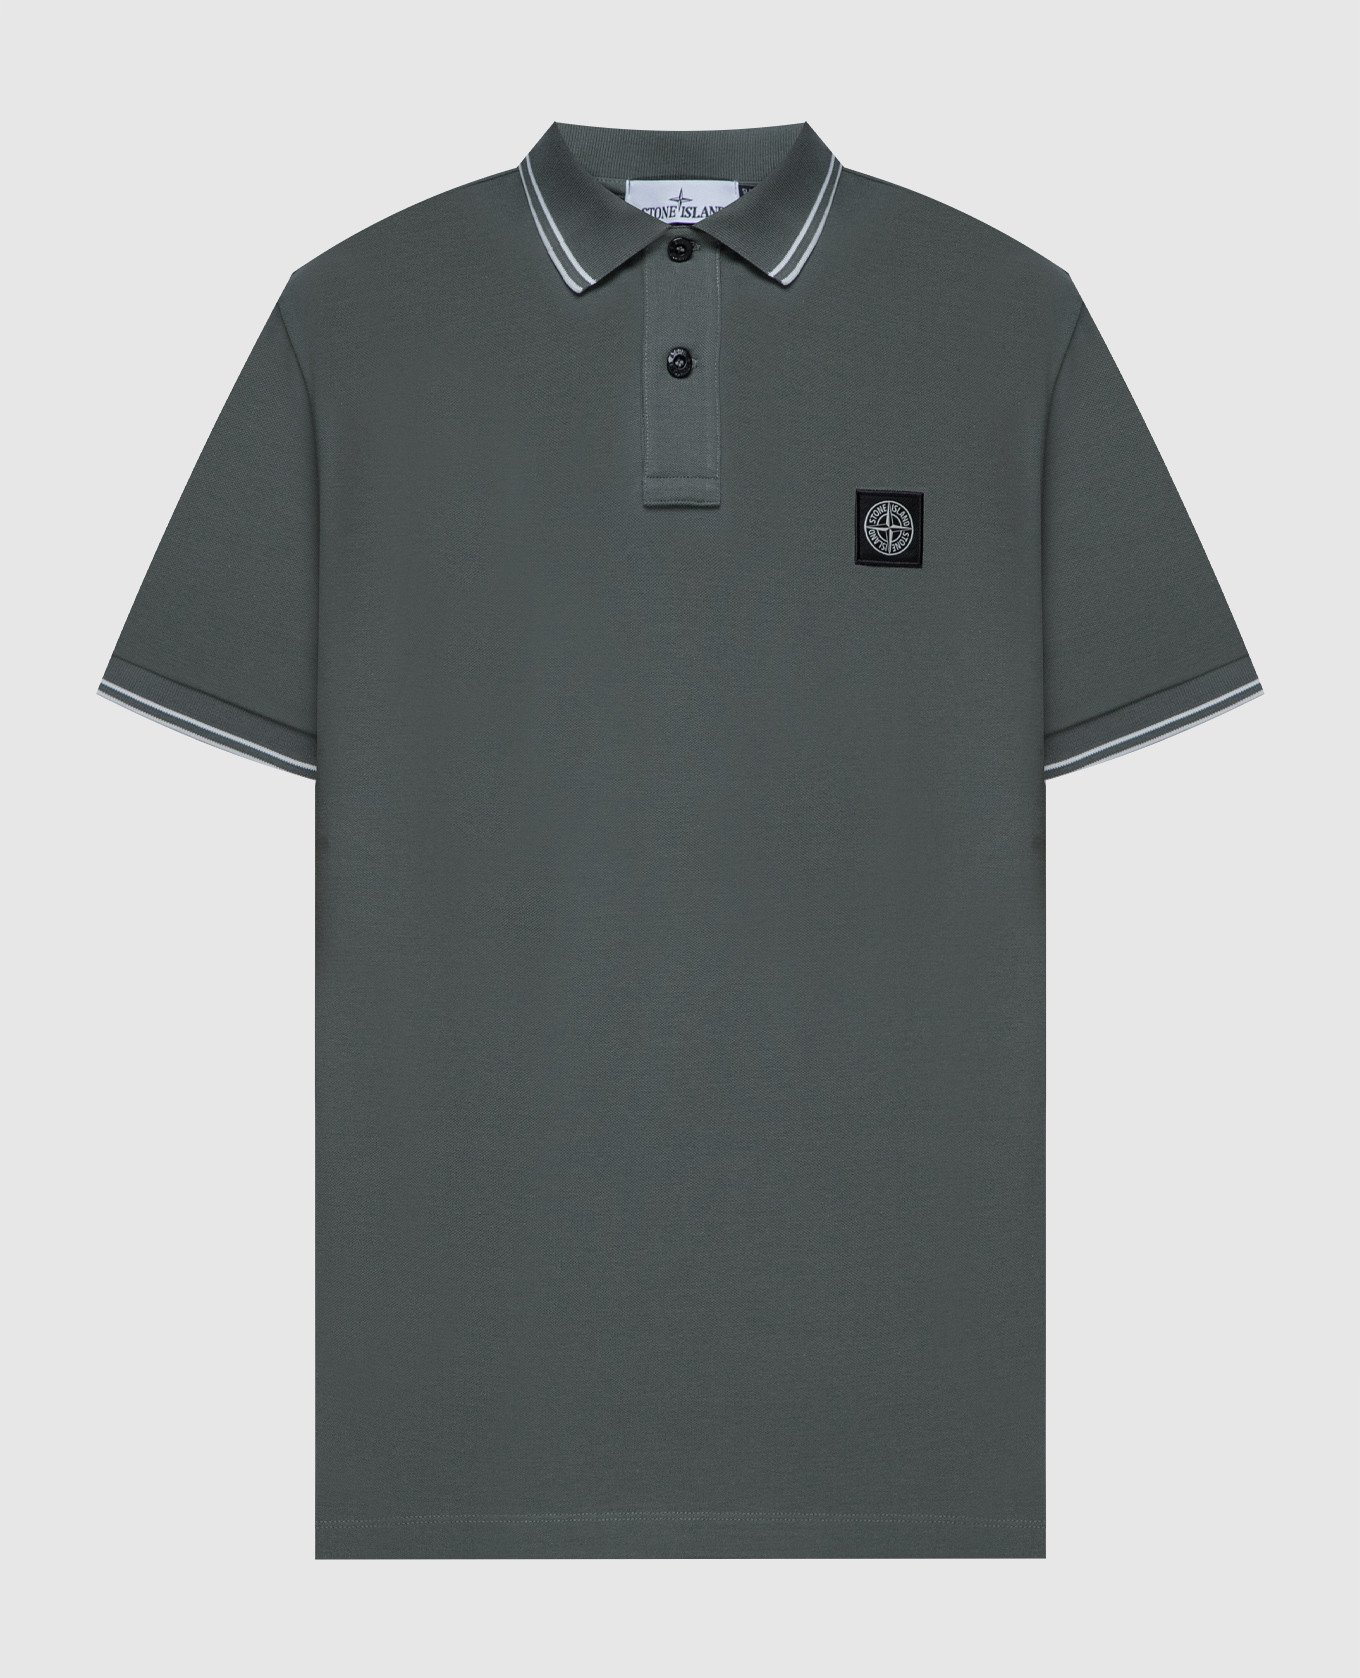 Green polo shirt with logo patch